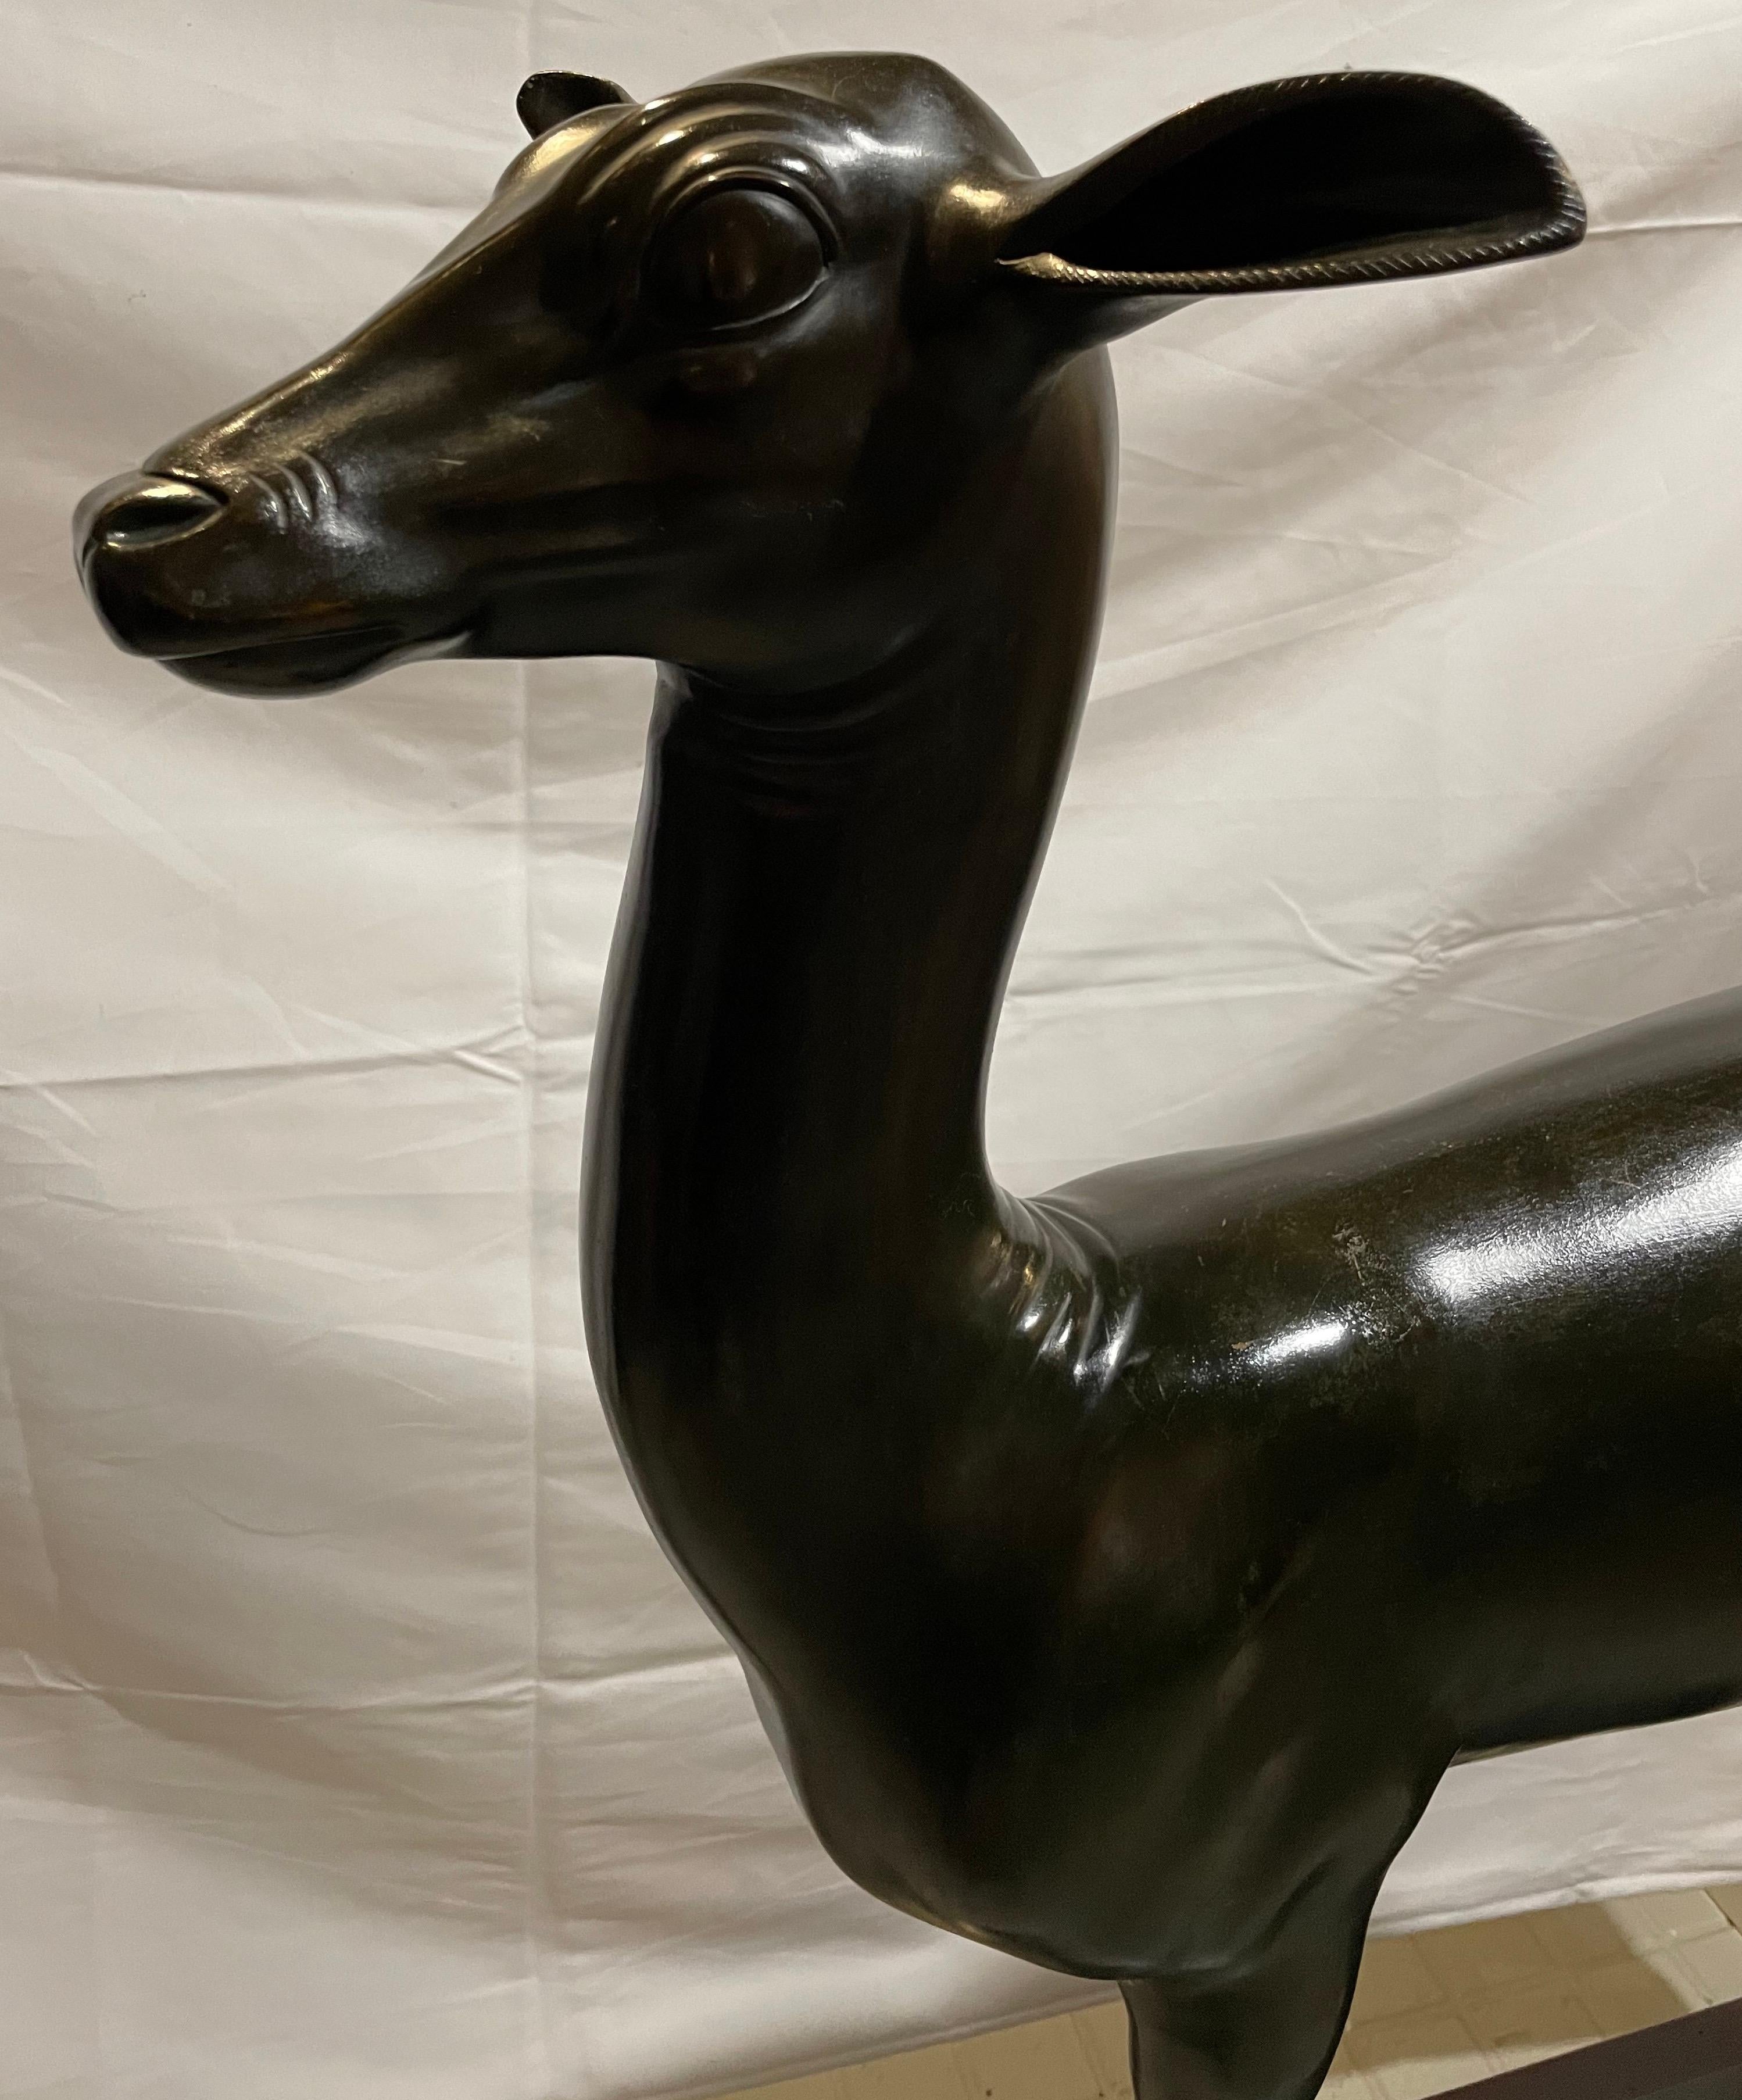 Large bronze from the Chiurazzi foundry in Naples, 
Exact copy of one of those found in Herculaneum and currently in the Archaeological Museum of Naples

Bronze measures:
94 cm. High
21 cm. Width
74cm. Long

Base measurements:
46cm. High
32 cm.